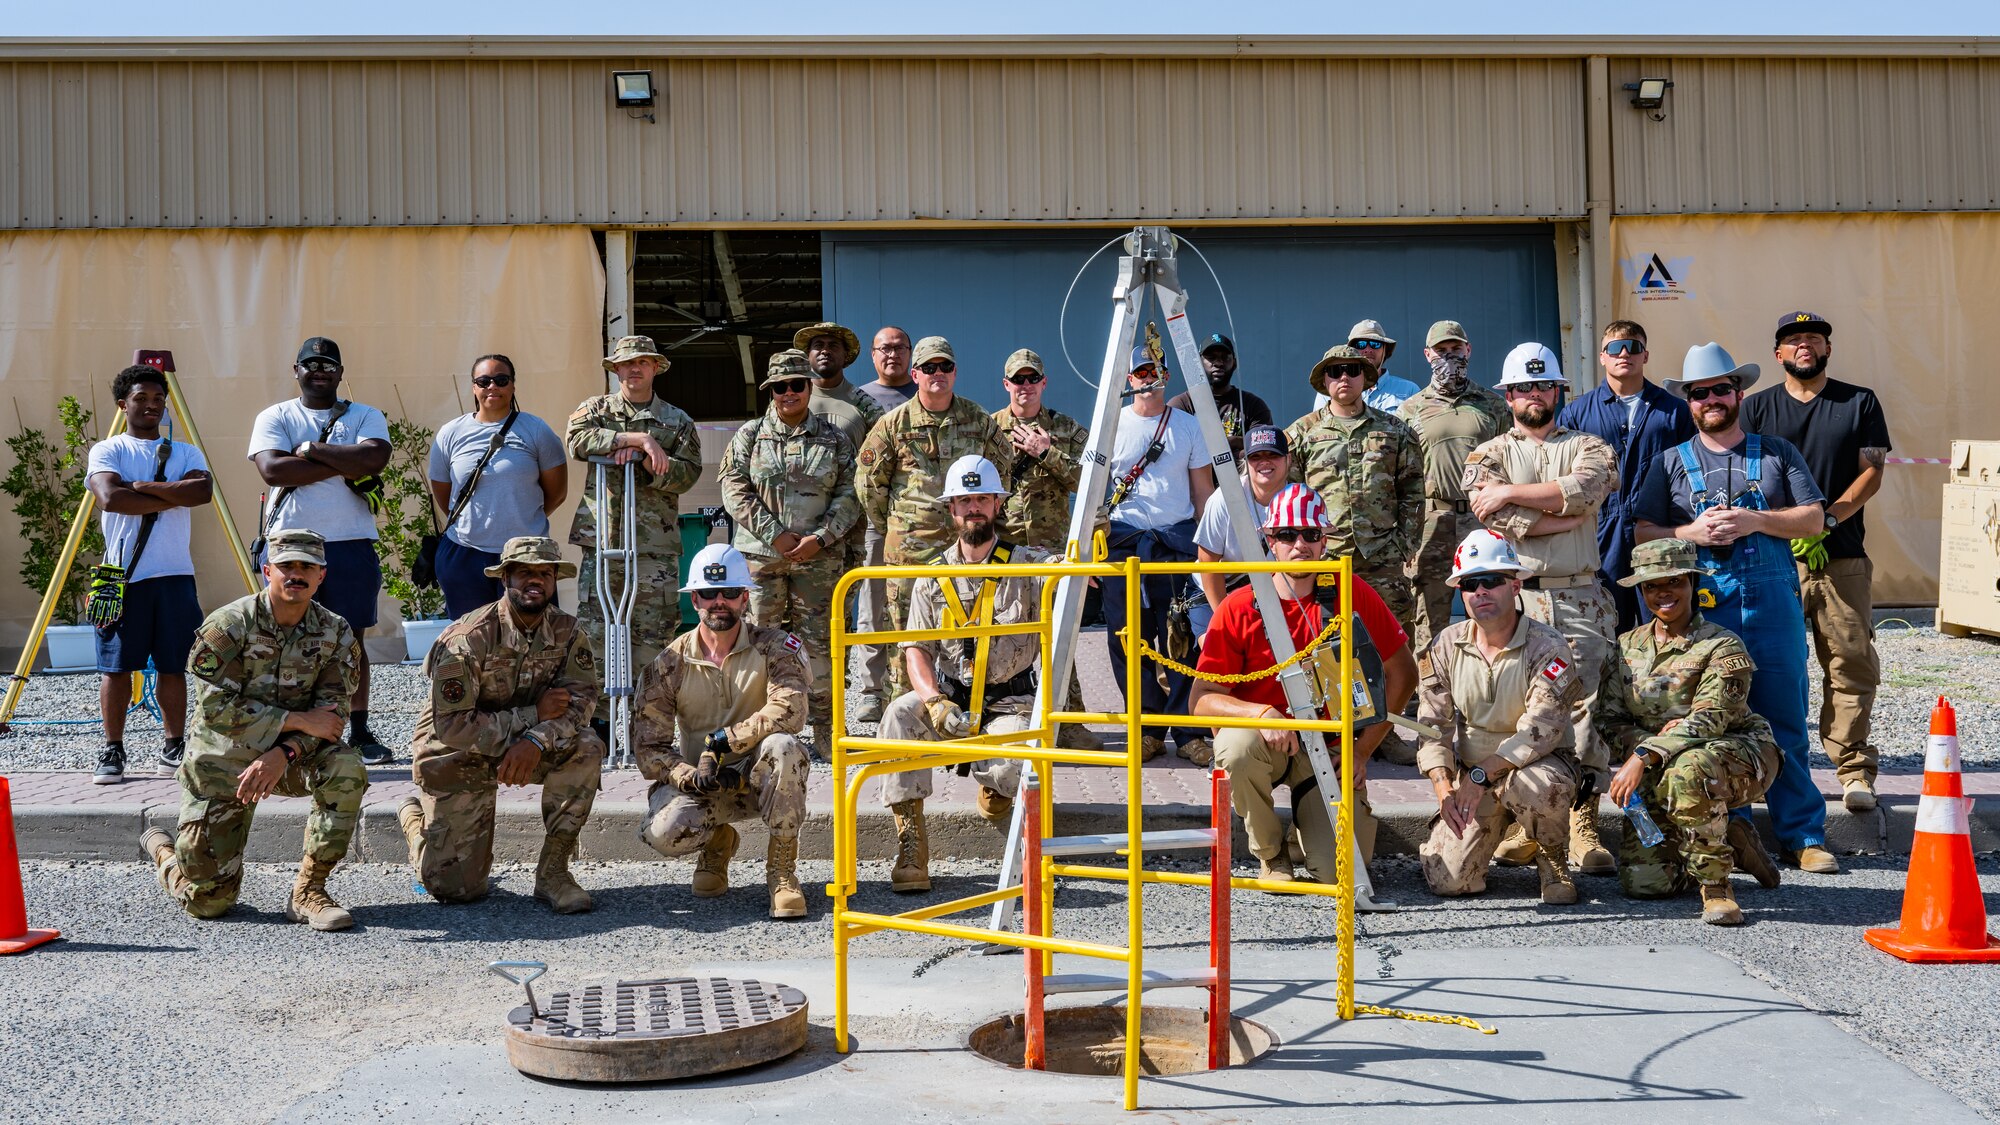 U.S. and Canadian personnel pose for a photo after completing confined-space training together at Ali Al Salem Air Base, Kuwait, July 25, 2023. This confined-space training allowed for the U.S. and our Canadian partners to share their knowledge and expertise, thus reducing the risks associated with confined-space operations for all. (U.S. Air Force photo by Staff Sgt. Kevin Long)